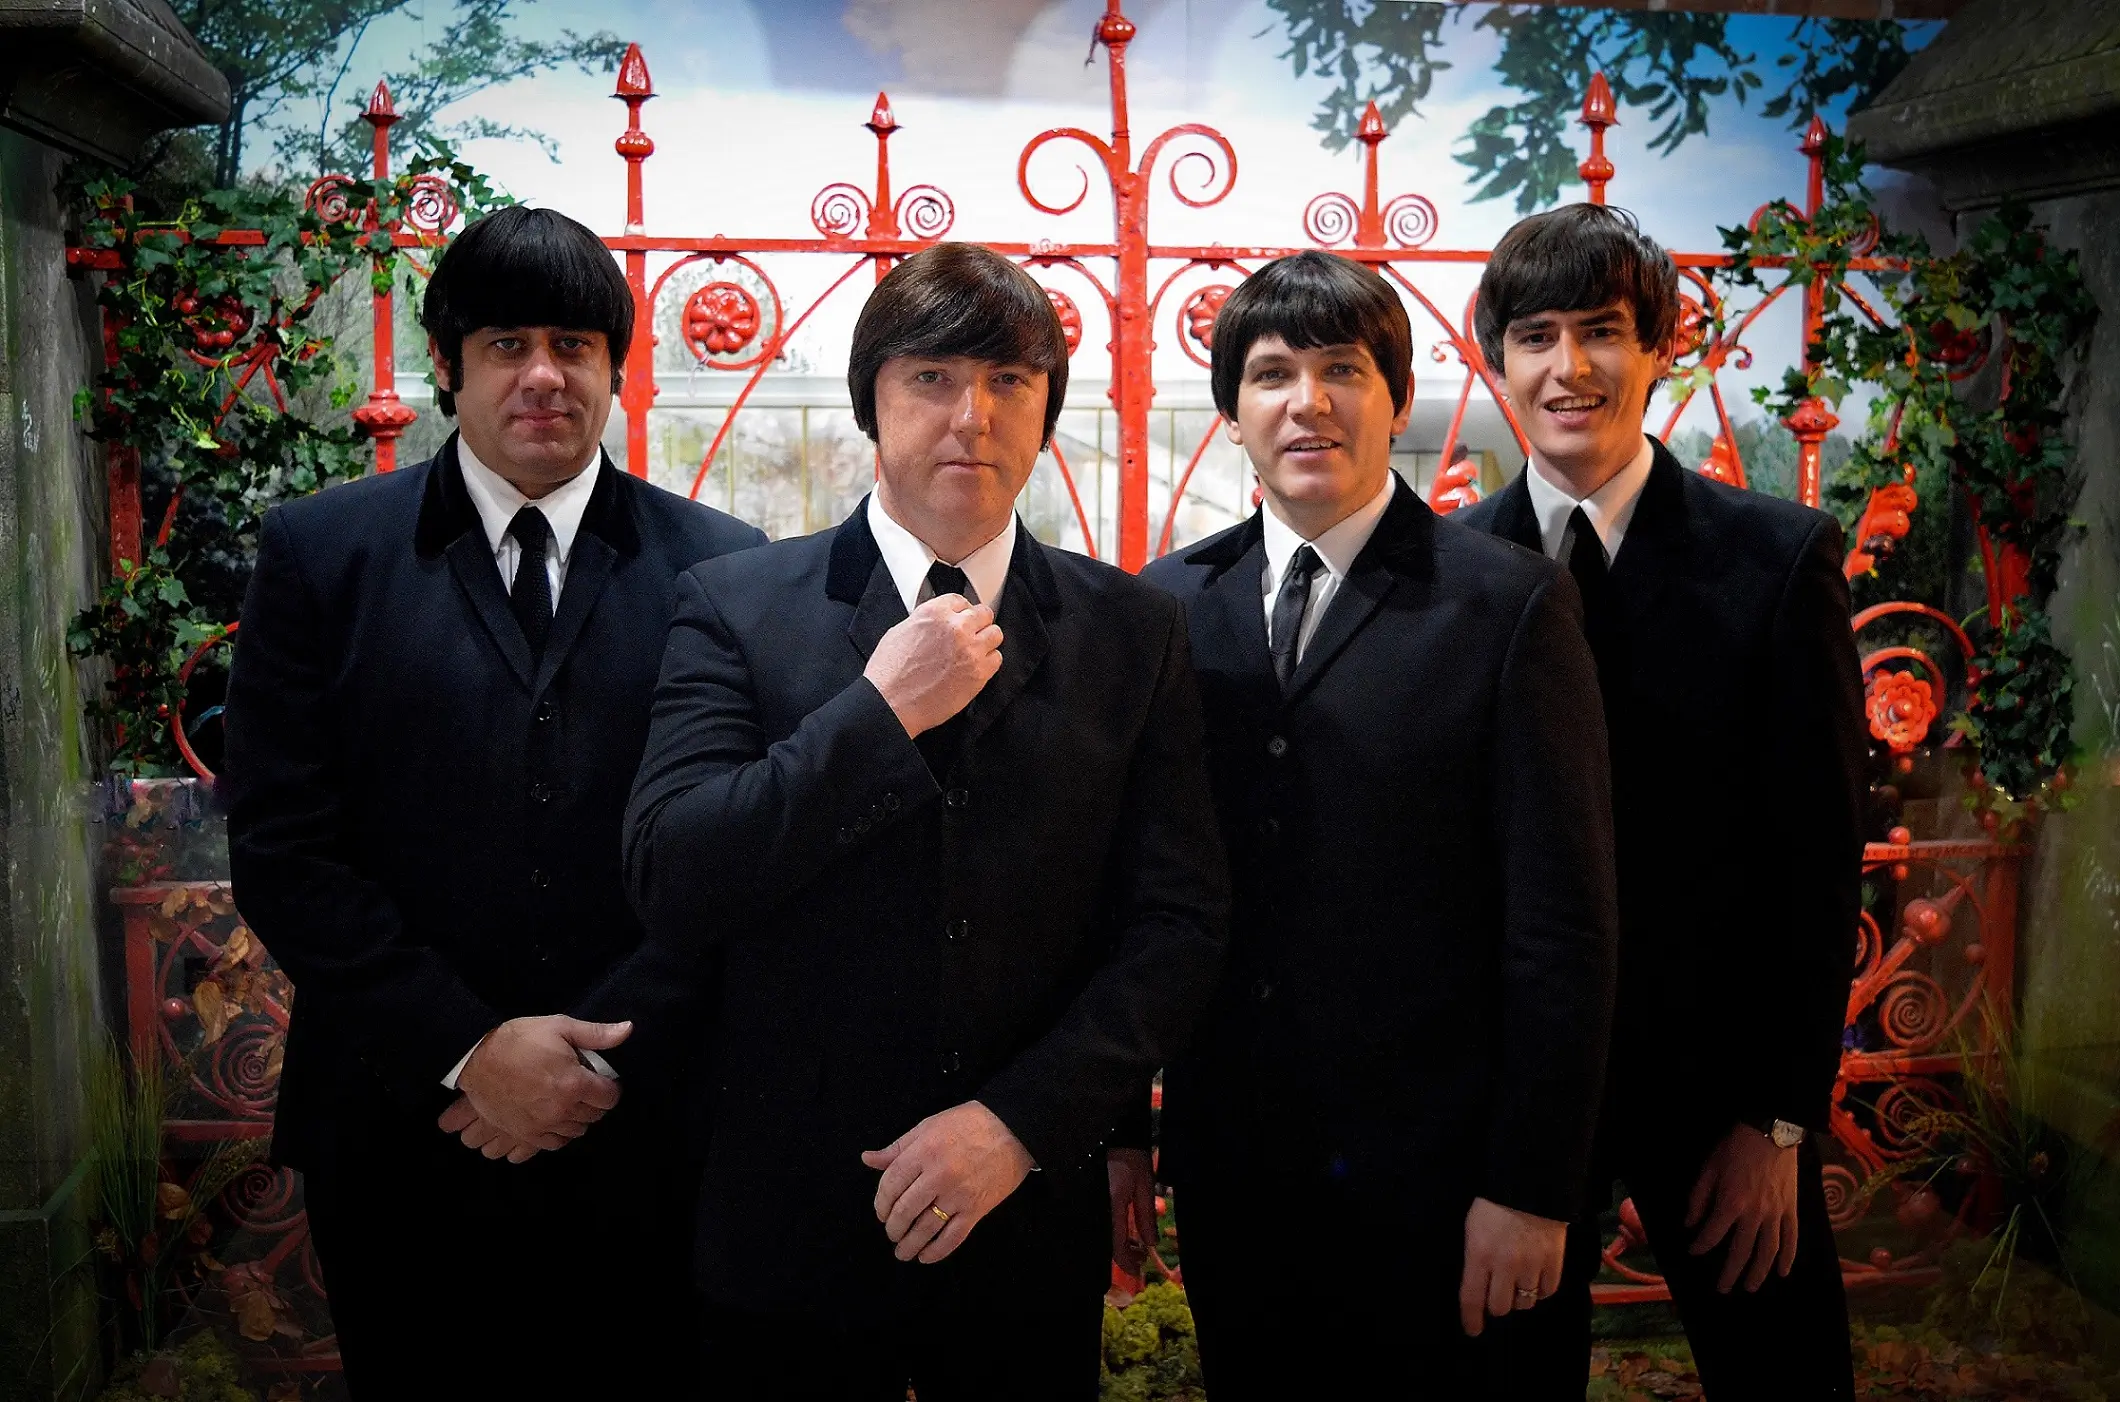 The Mersey Beatles standing in front of the Strawberry Field gates